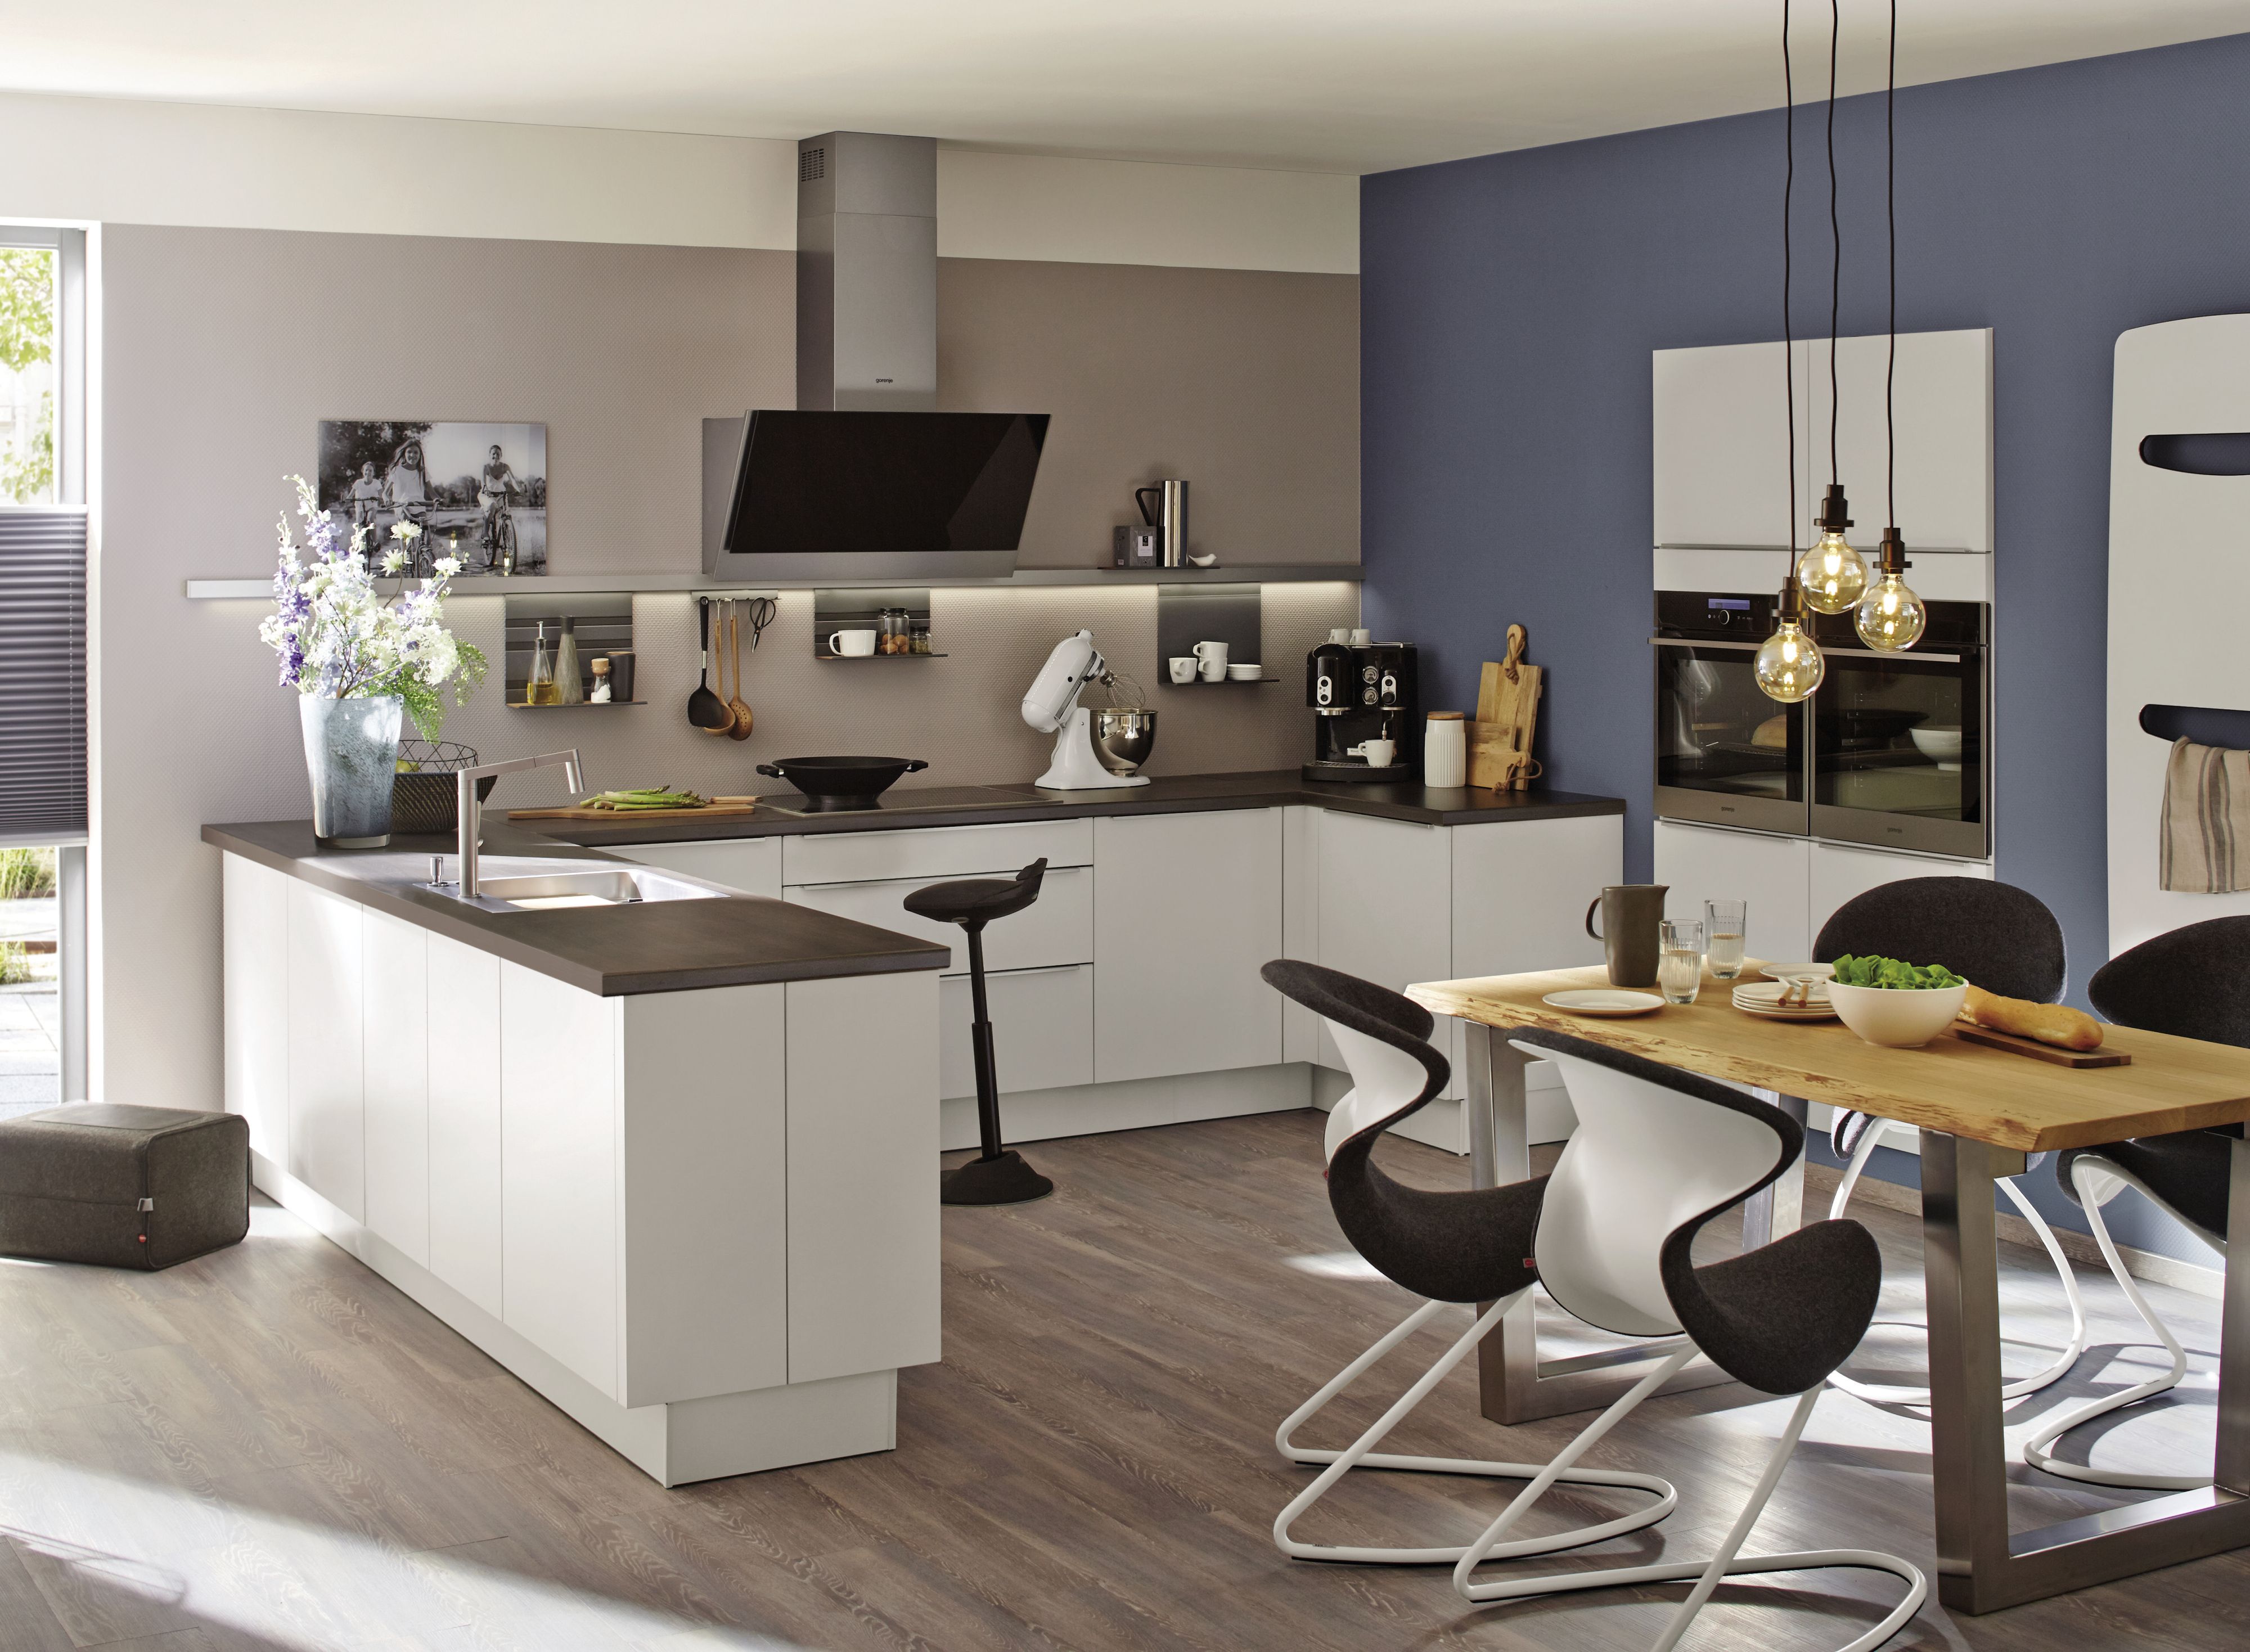 The U-kitchen is particularly well suited to families due to its spacious working area.